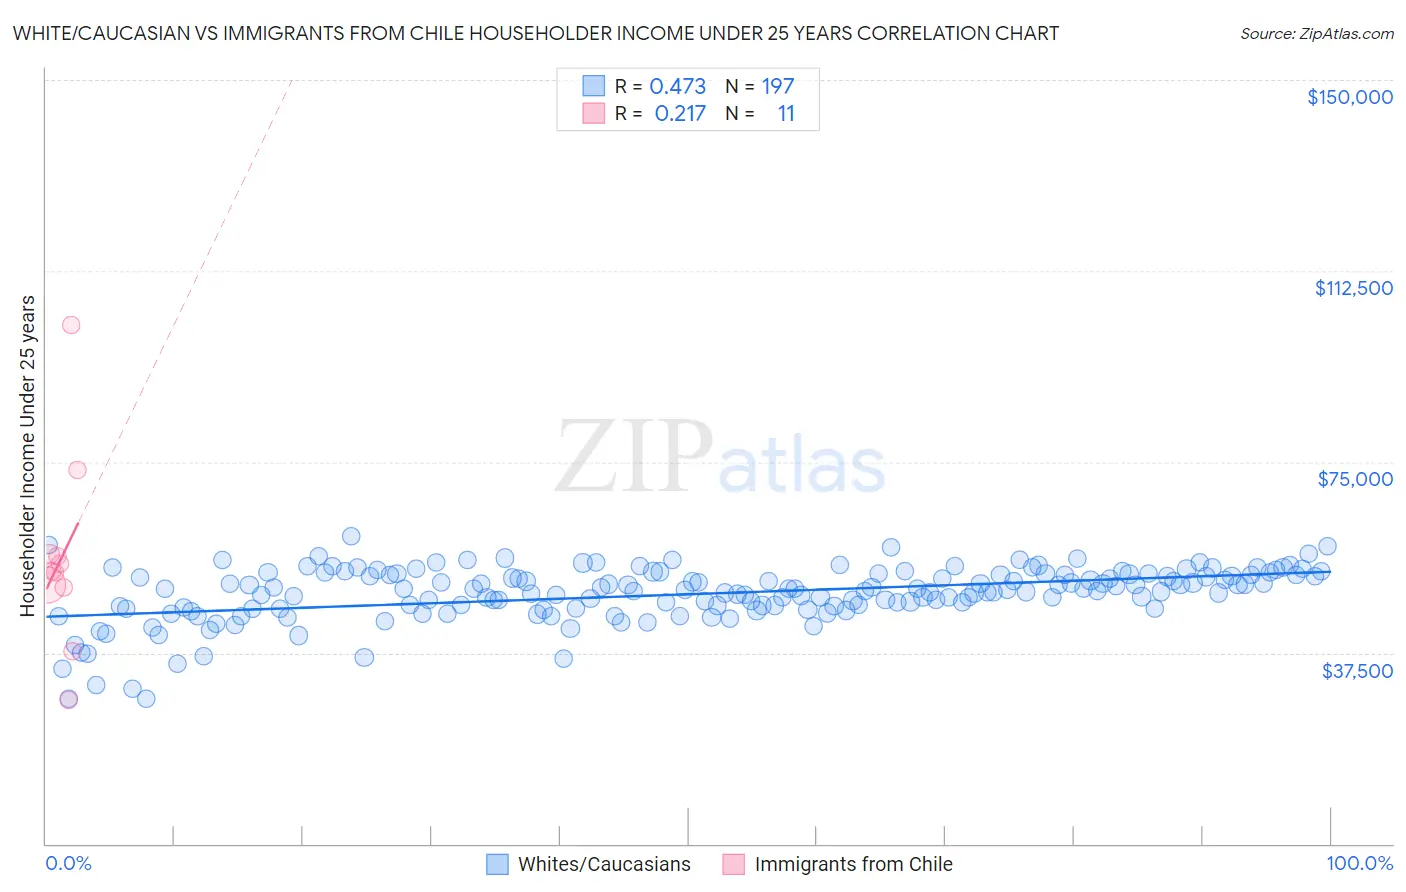 White/Caucasian vs Immigrants from Chile Householder Income Under 25 years